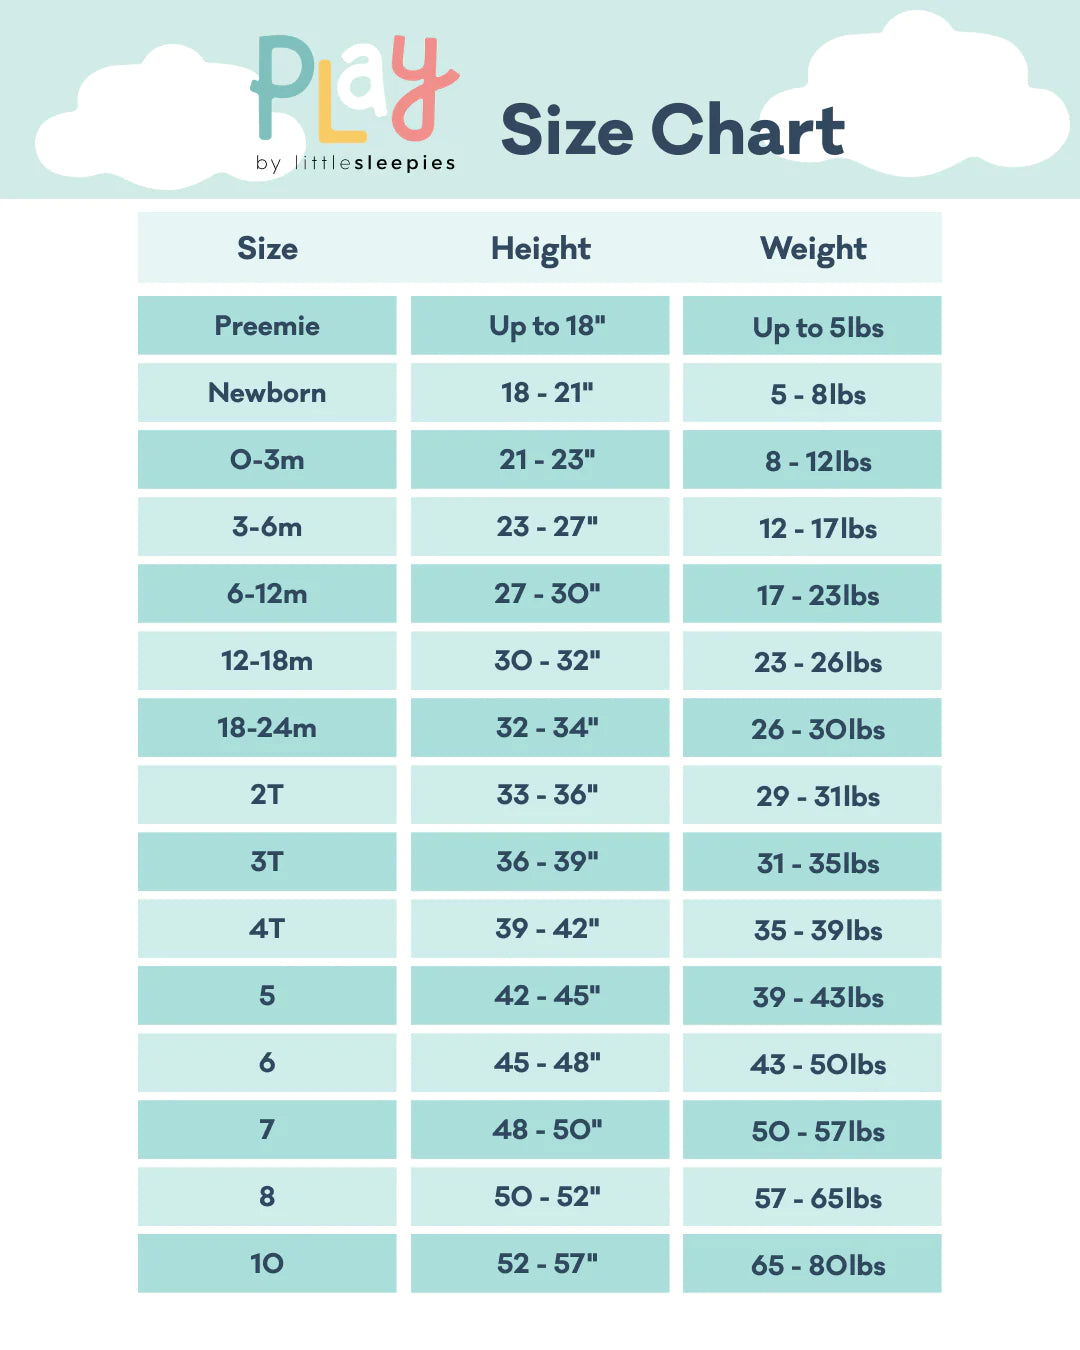 Play Size Chart: size Preemie fits up to 5lbs and up to 18in; size Newborn fits 5-8lbs and 18-21in; size 0-3M fits 8-12lbs and 21-23in; size 3-6M fits 12-17lbs and 23-27in; 6-12M fits 17-23lbs and 27-30in; size 12-18M fits 23-26lbs and 30-32in; size 18-24M fits 26-30lbs and 32-34in; size 2T fits 29-31lbs and 33-36in; size 3T fits 31-35lbs and 36-39in; size 4T fits 35-39lbs and 39-42in; size 5 fits 39-43lbs and 42-45in; size 6 fits 43-50lbs and 45-48in; size 7 fits 50-57lbs and 48-50in; size 8 fits 57-65lbs and 50-52in; size 10 fits 65-80lbs and 52-57in